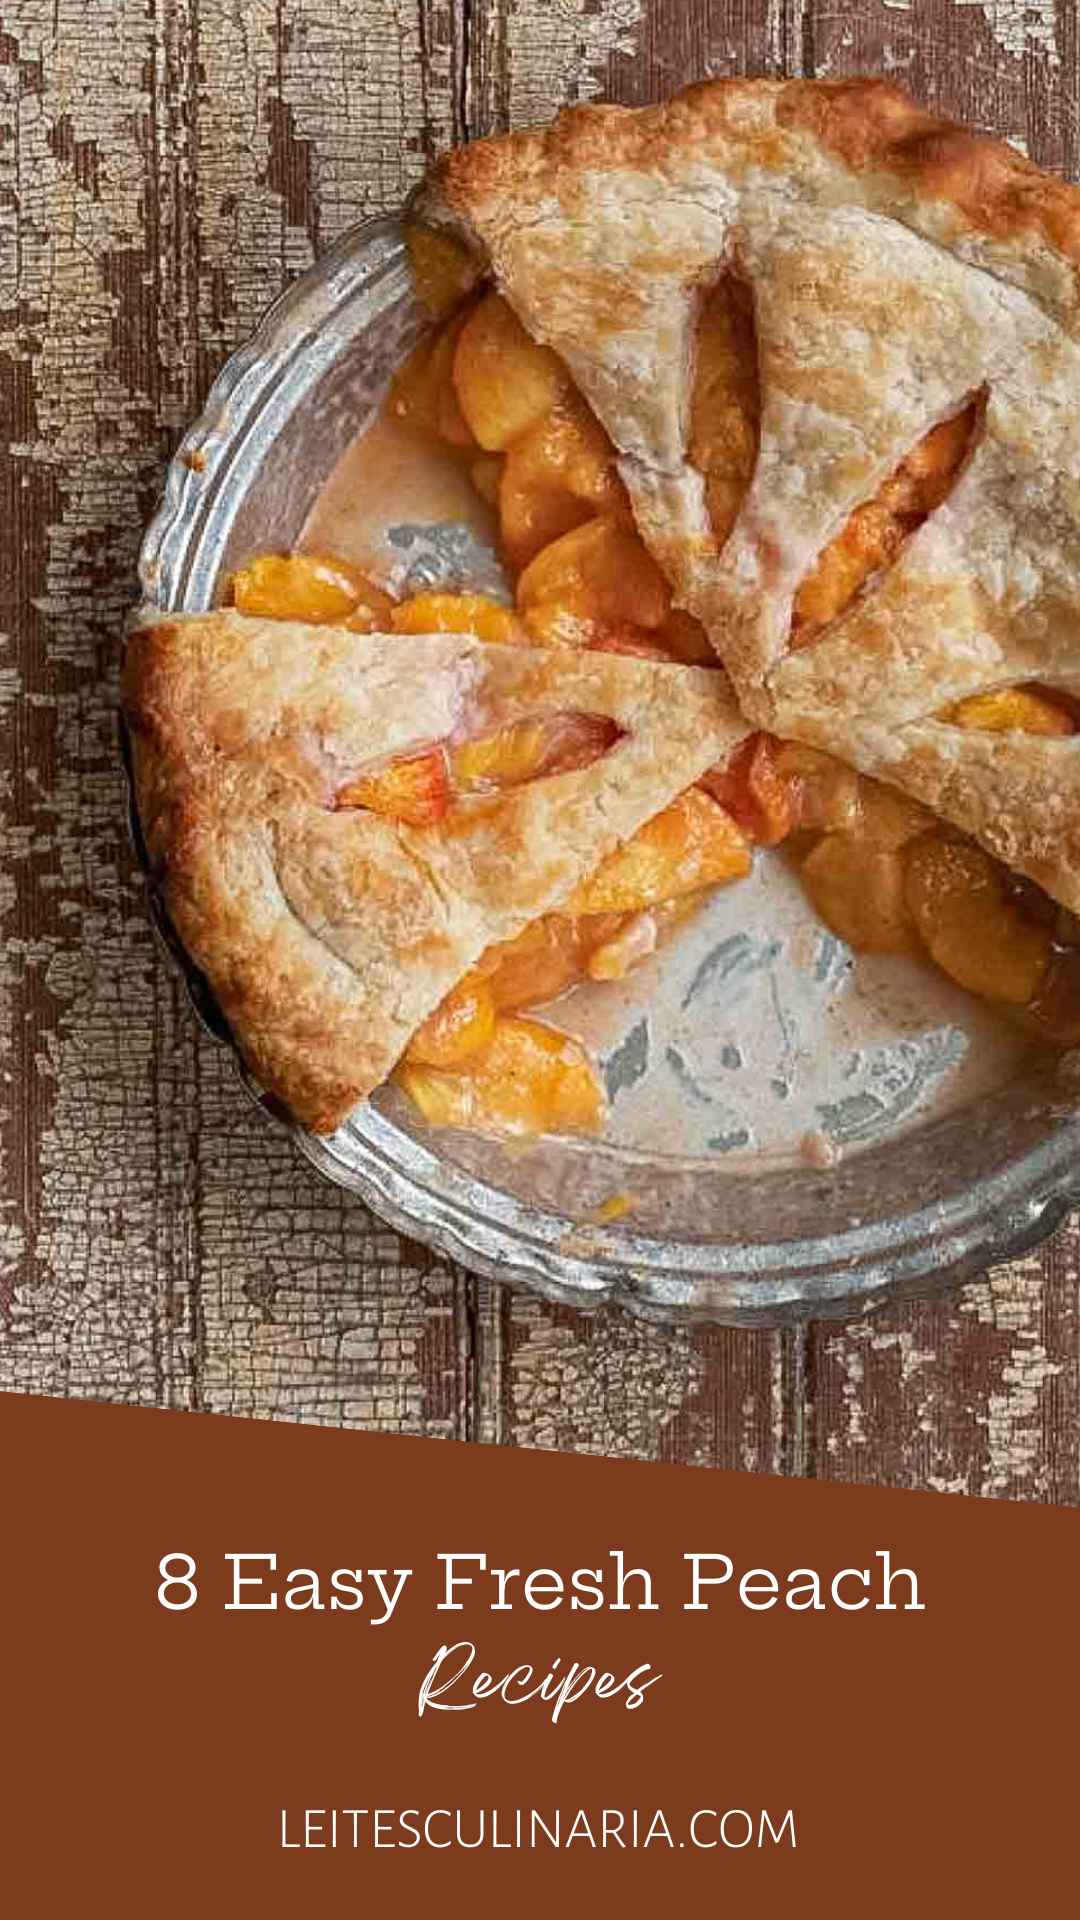 A fresh peach pie with a few slices missing.